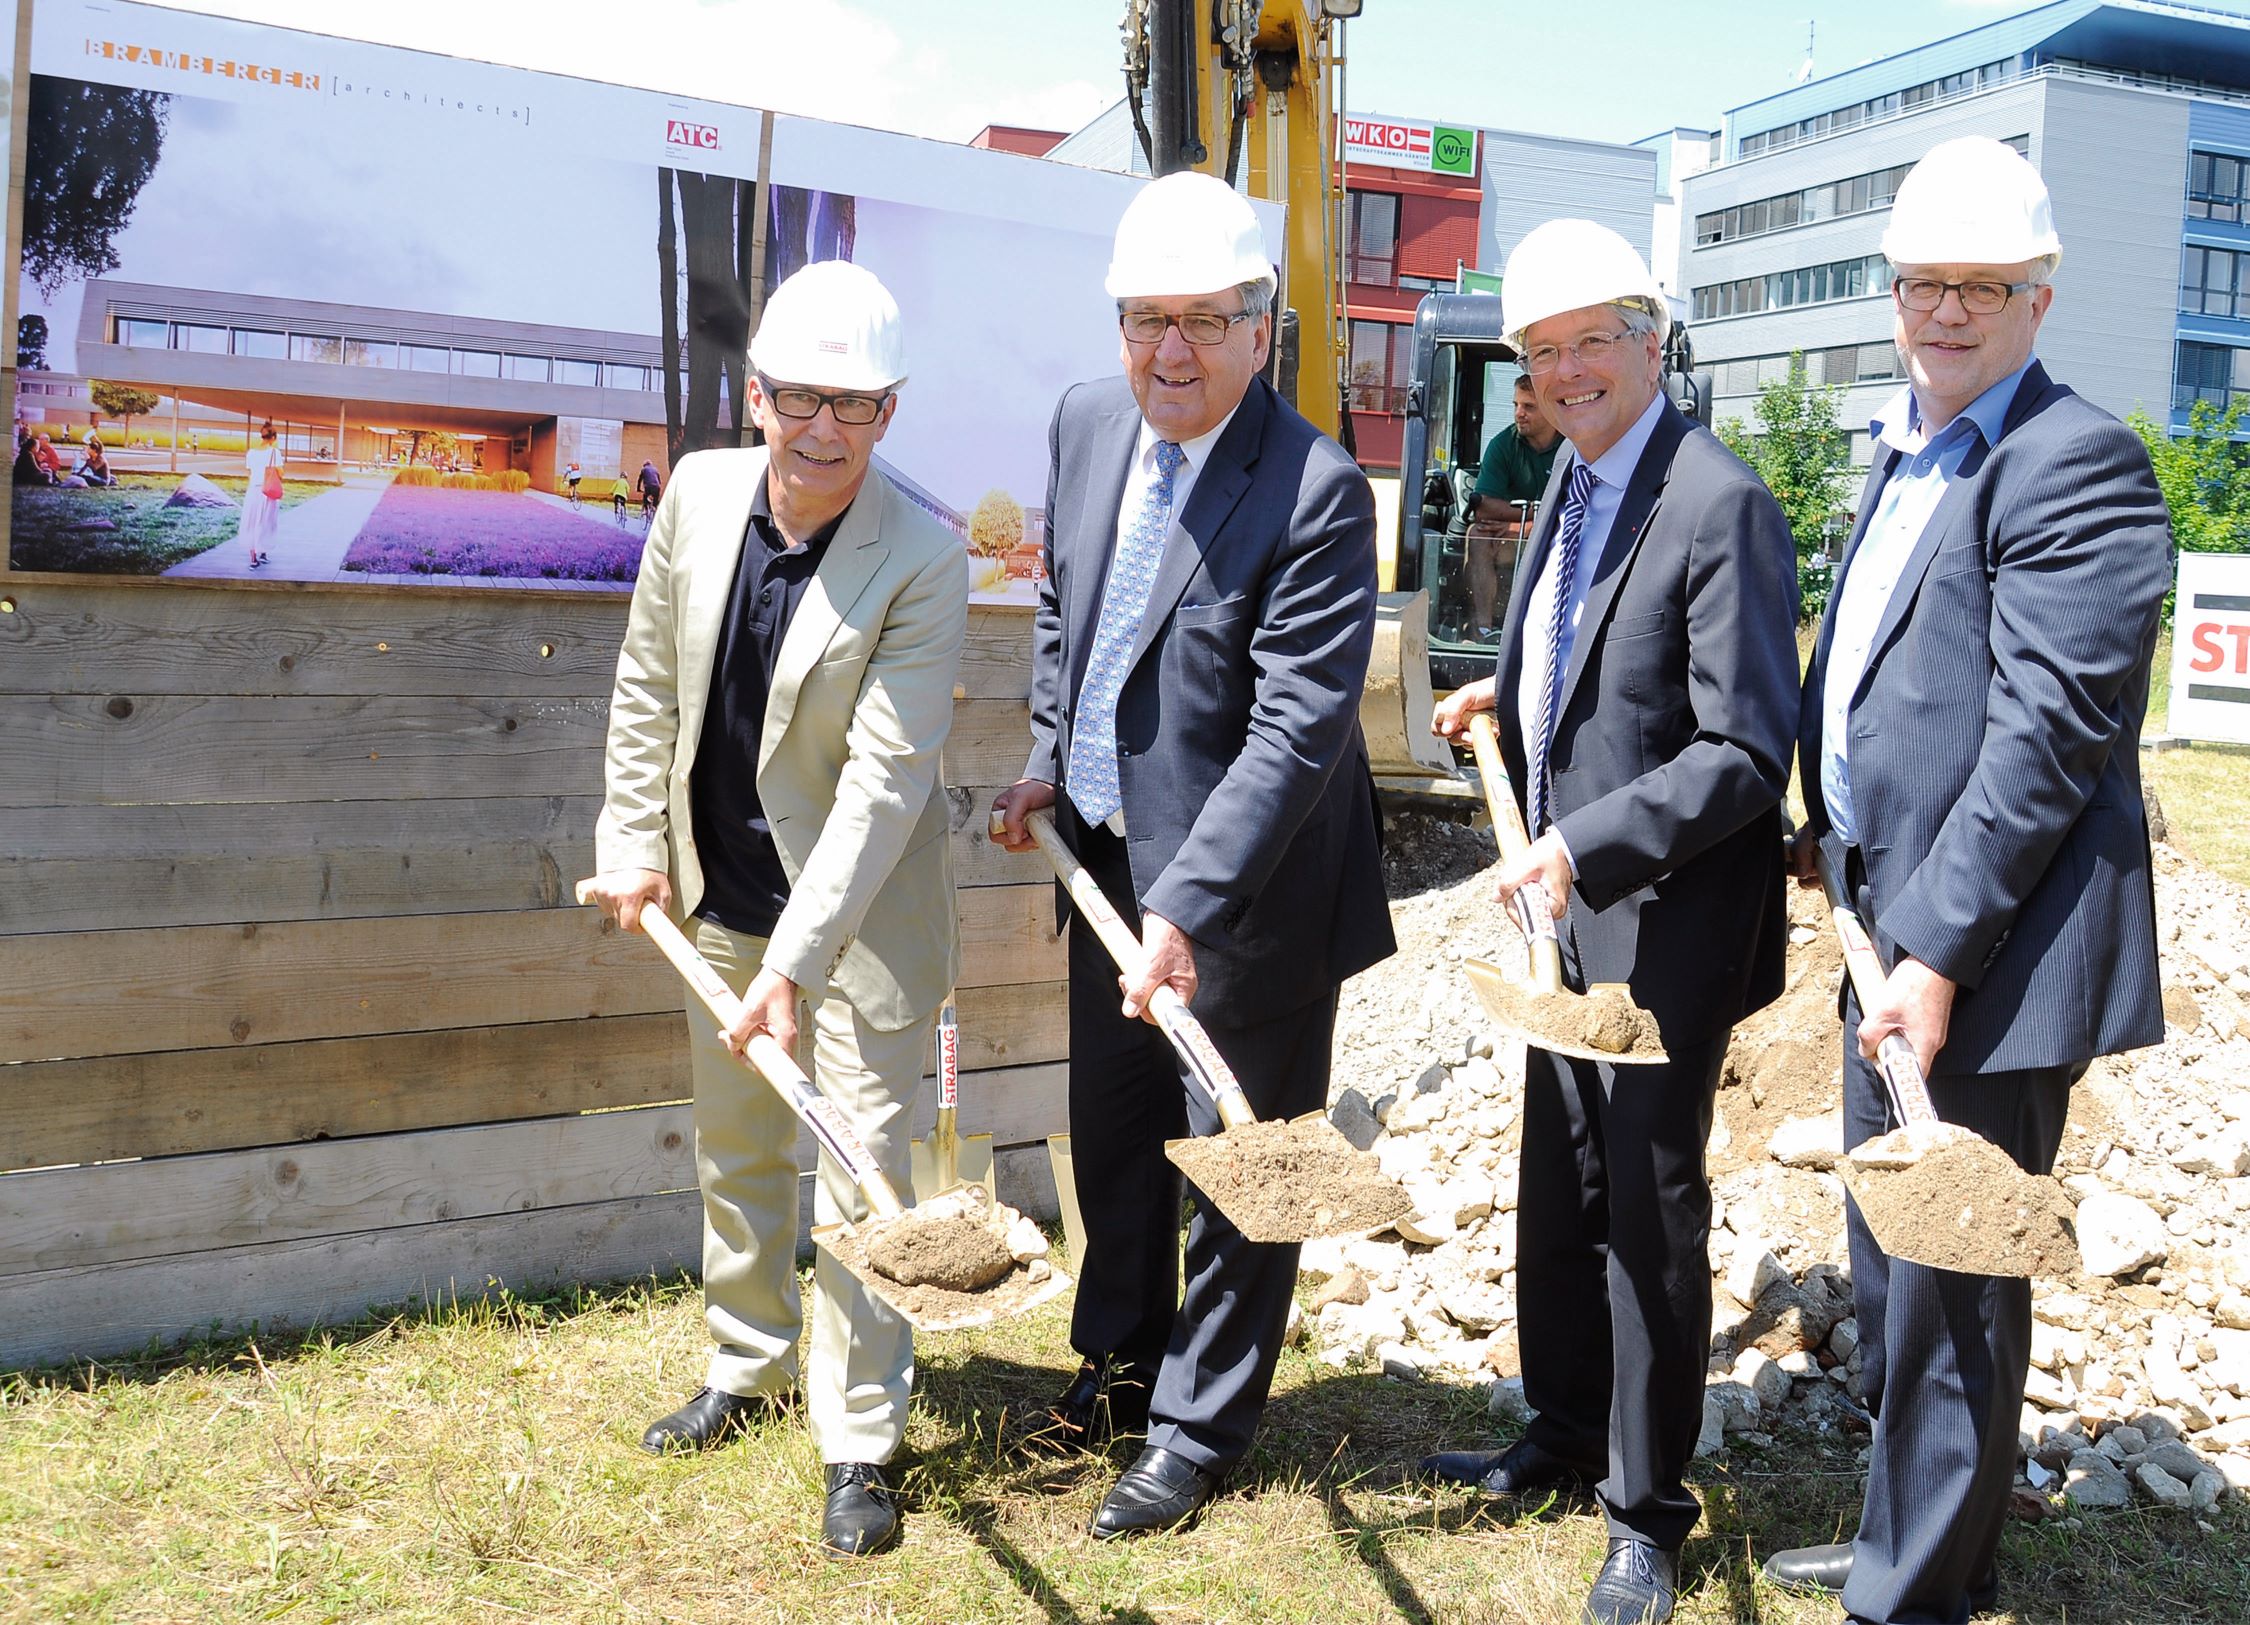 Groundbreaking for the High Tech Campus Villach